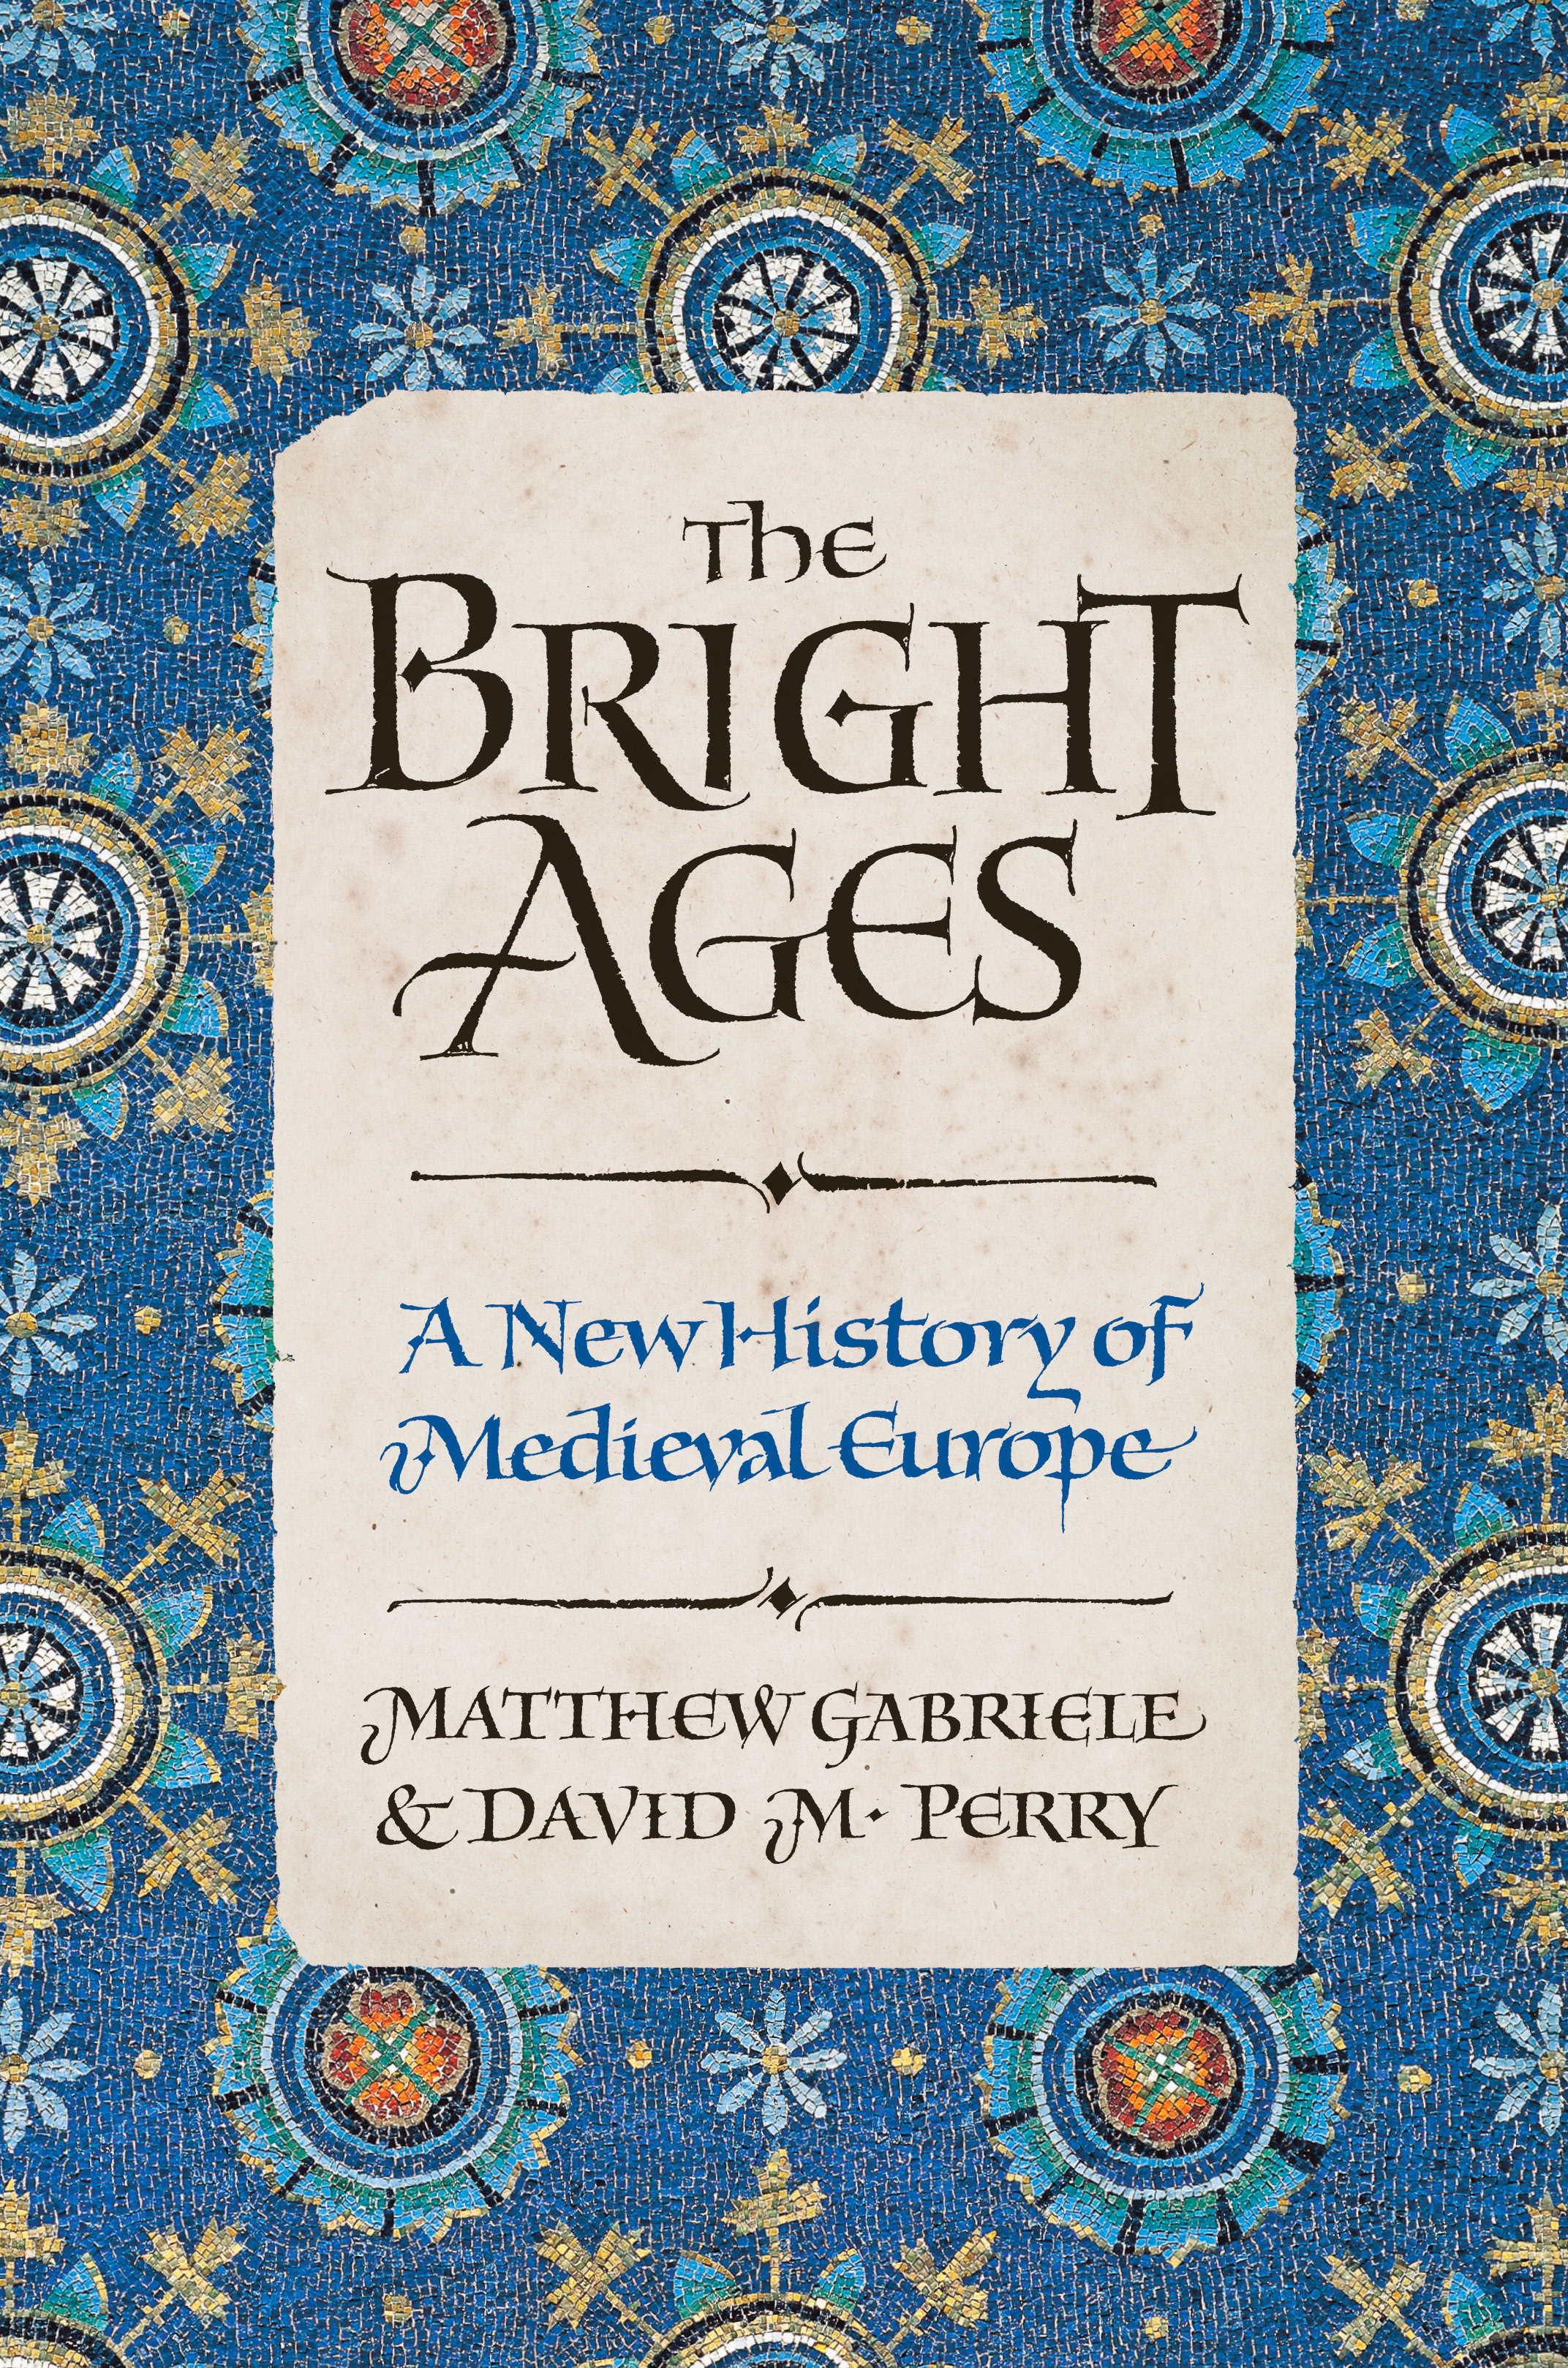 The cover of The Bright Ages, featuring a blue, yellow, and orange paisley, mosaic pattern.